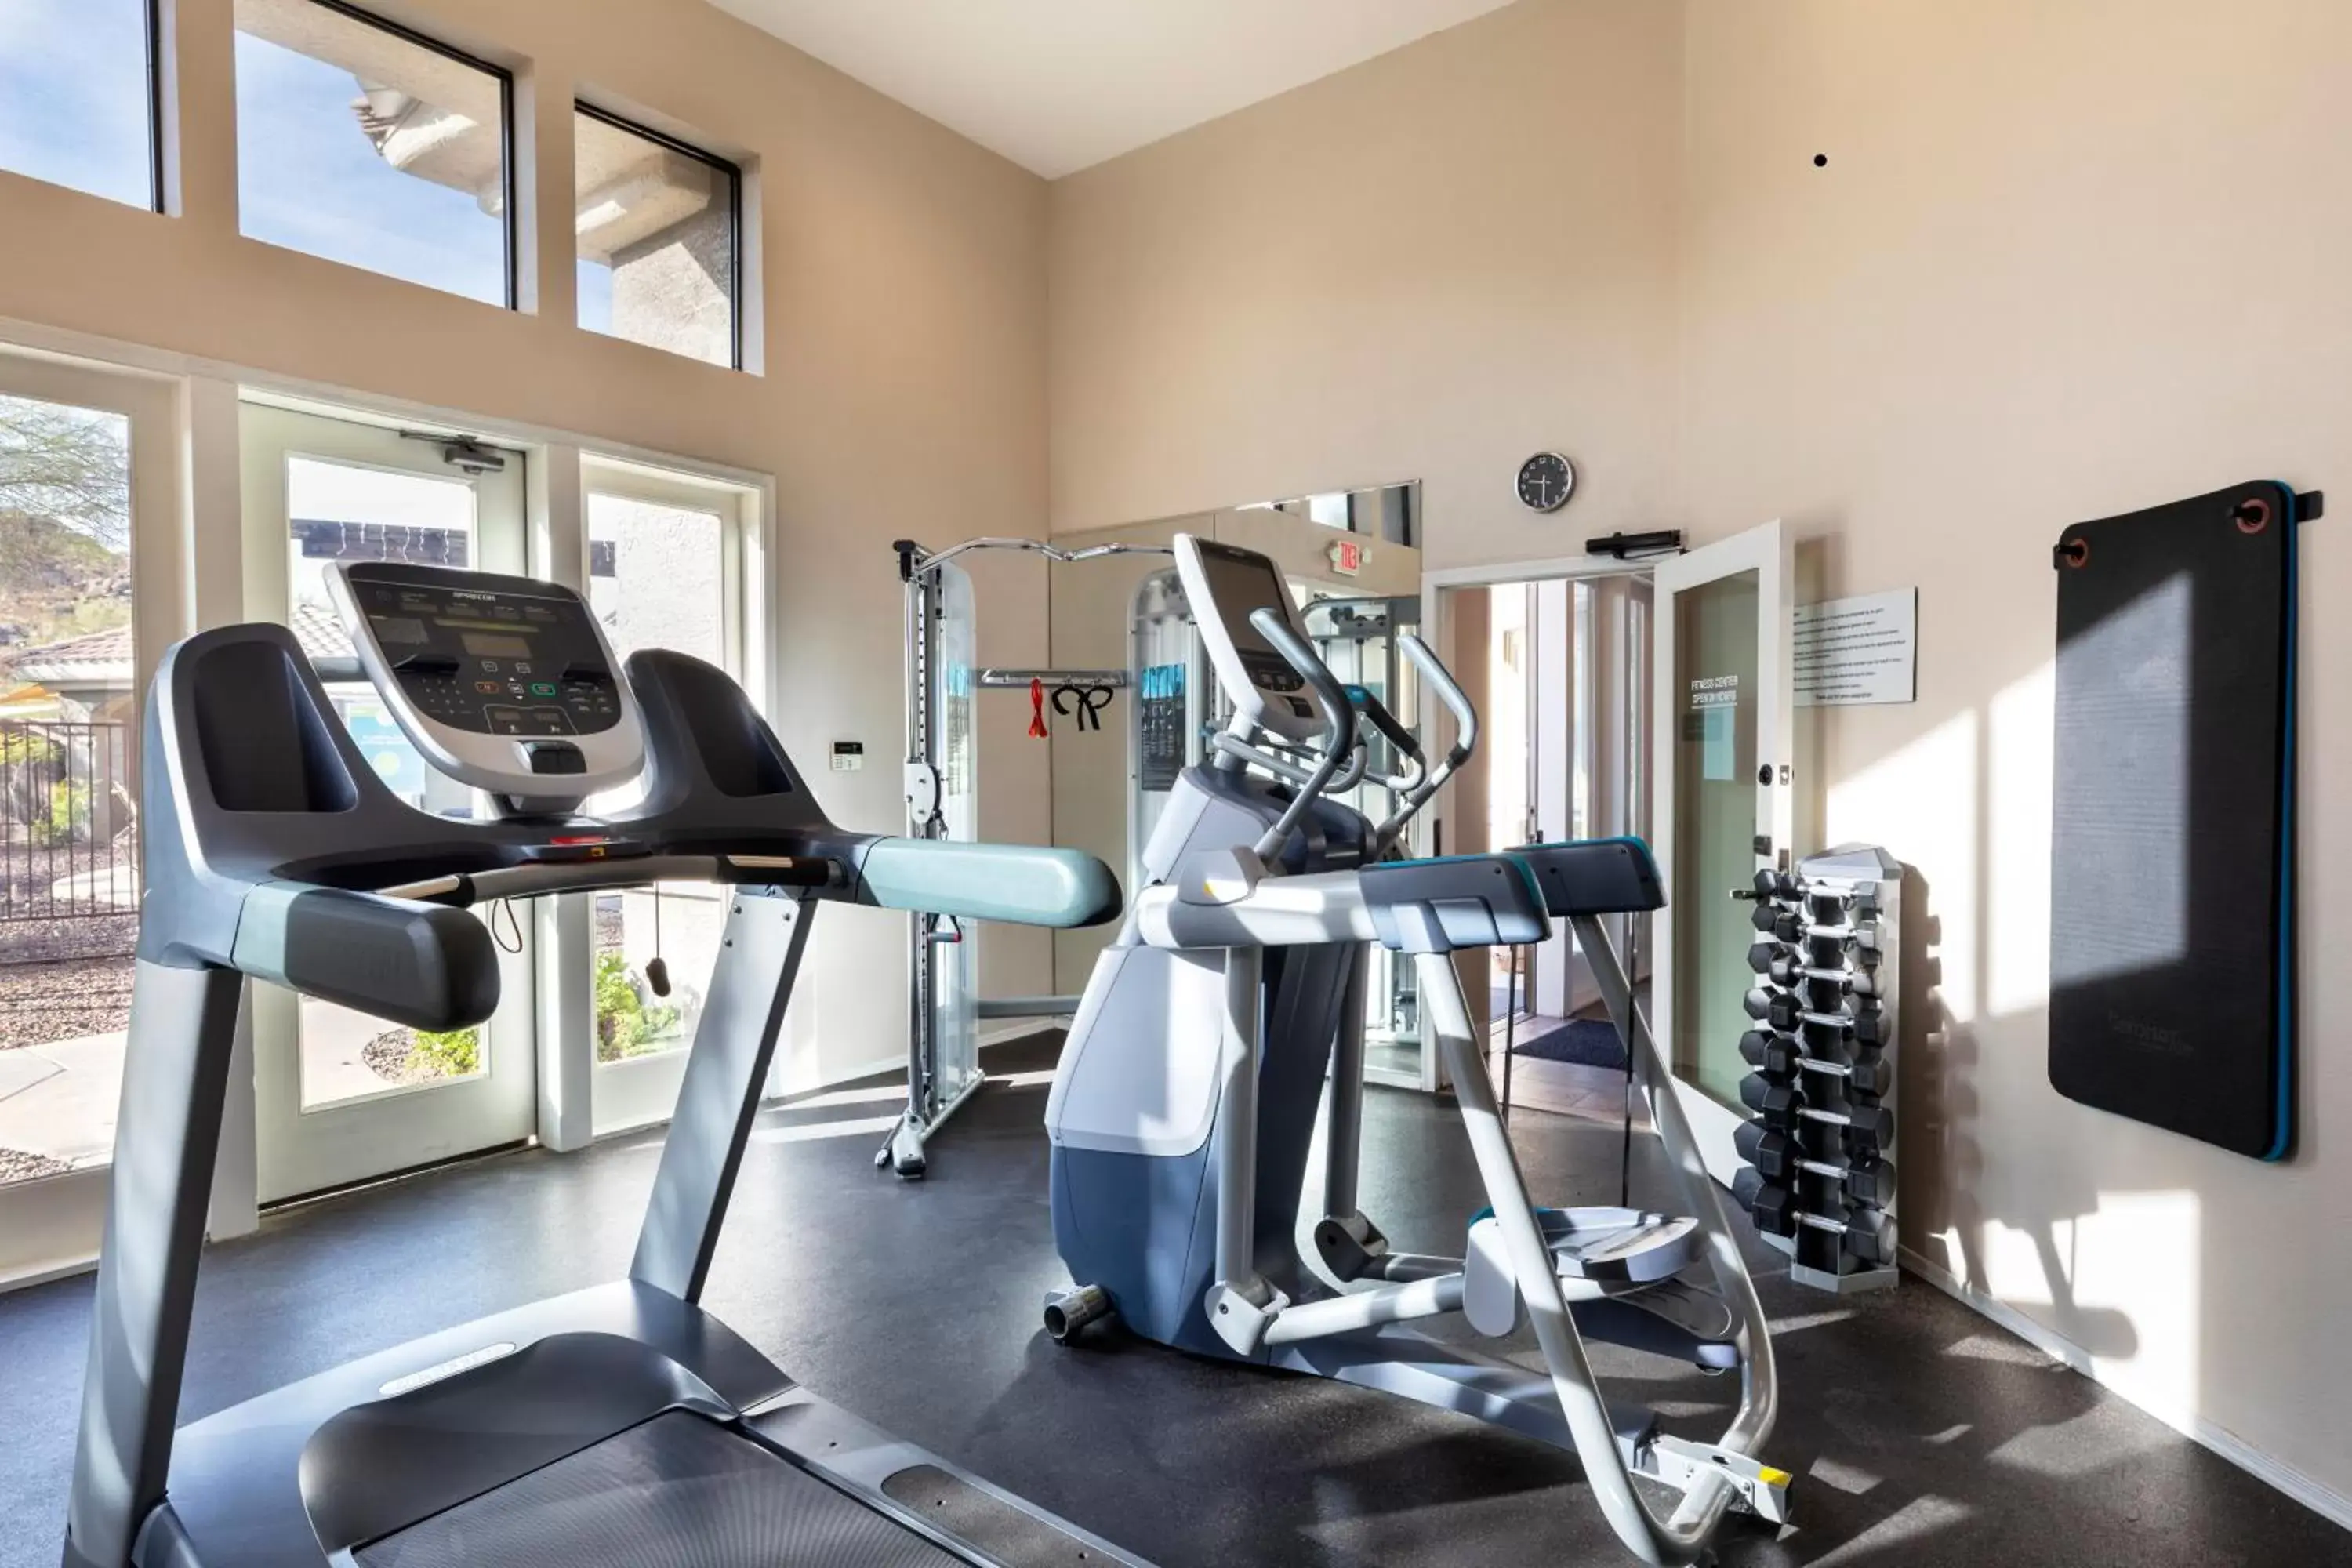 Fitness centre/facilities, Fitness Center/Facilities in Raintree at Phoenix South Mountain Preserve